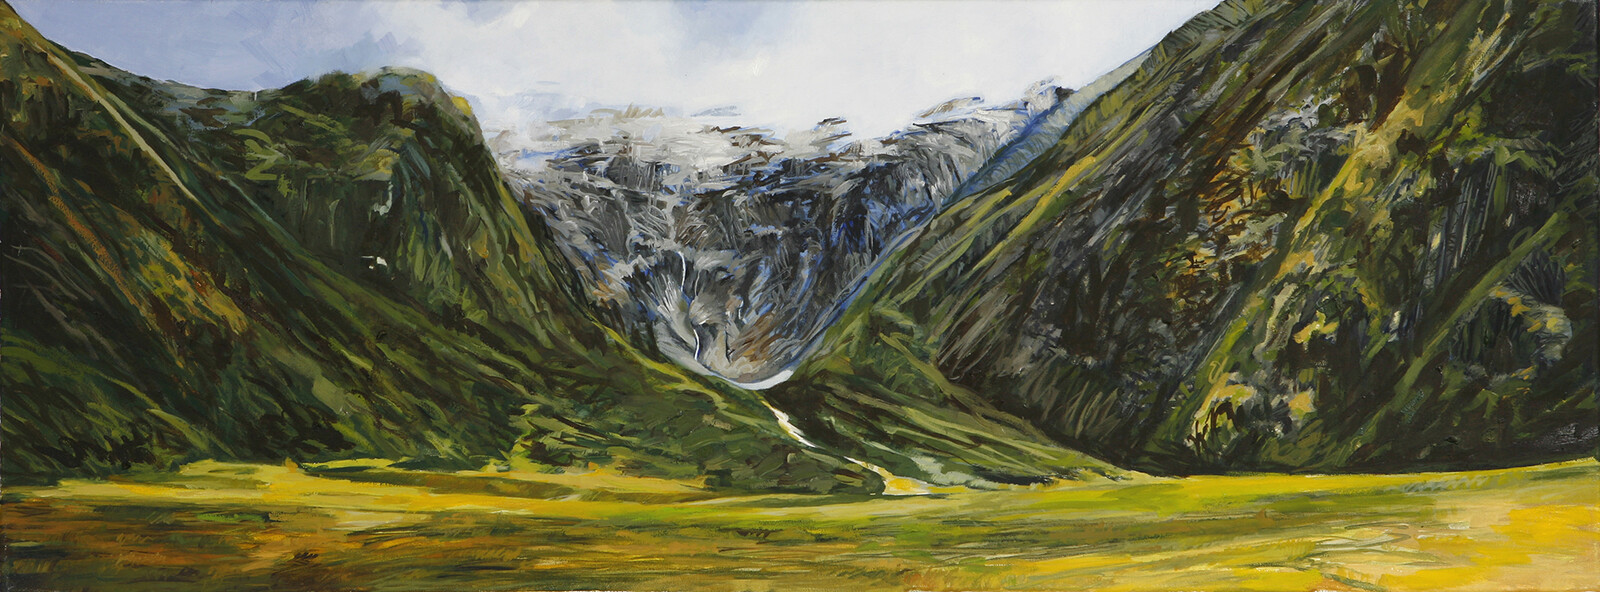 "Jancapampa (1)". Andes peruanos. 80x30cm. Oil on canvas.